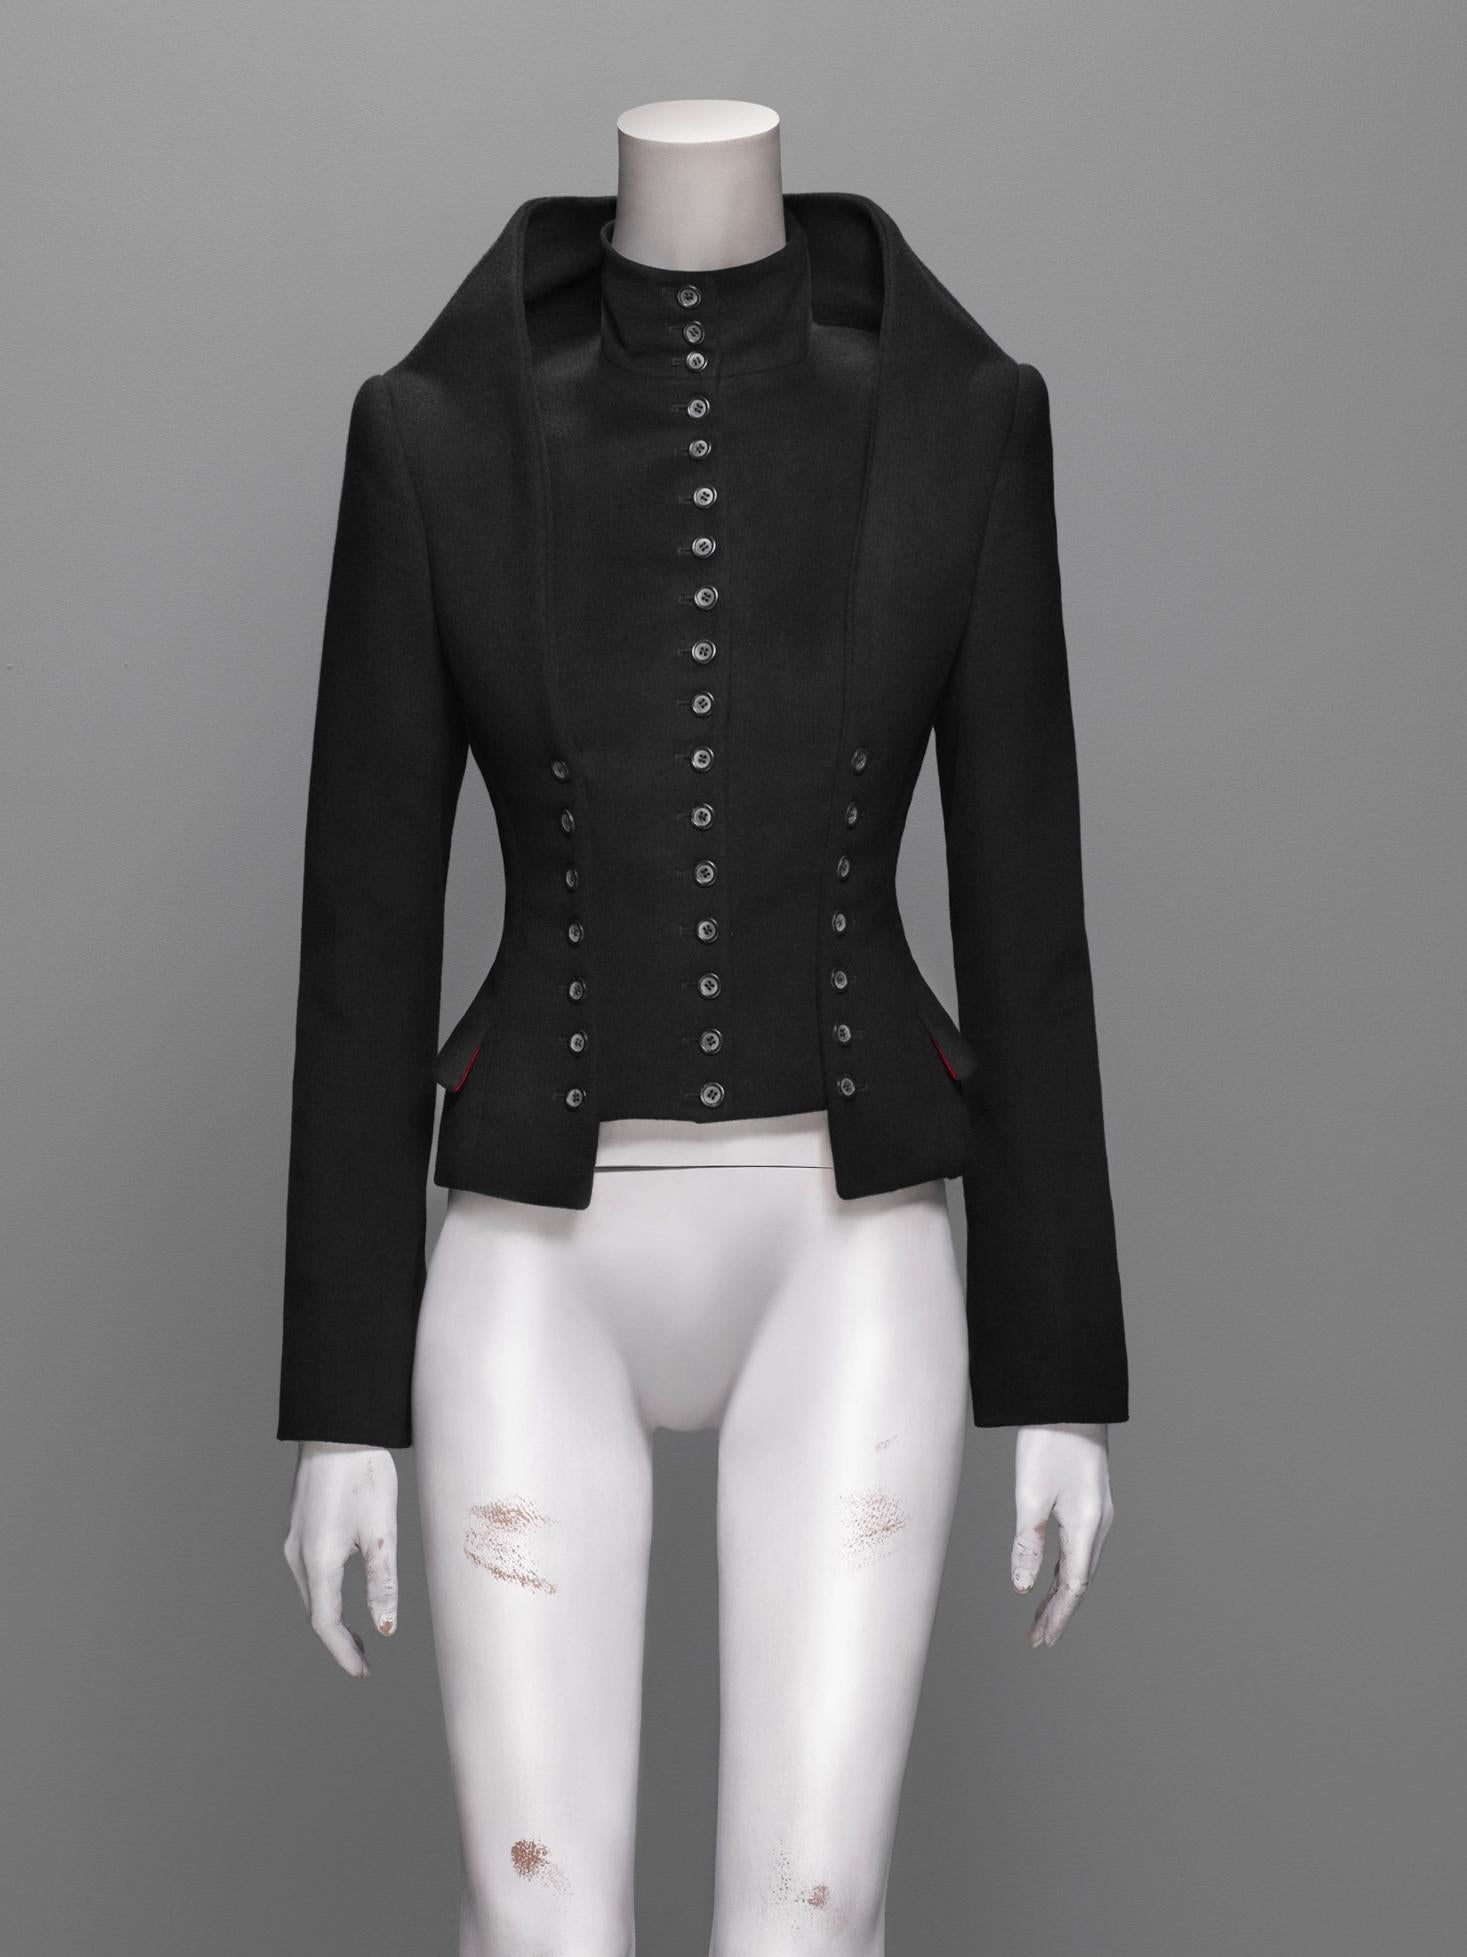 Alexander McQueen black cashmere 'Joan' jacket and skirt suit, fw 1998 For Sale 4